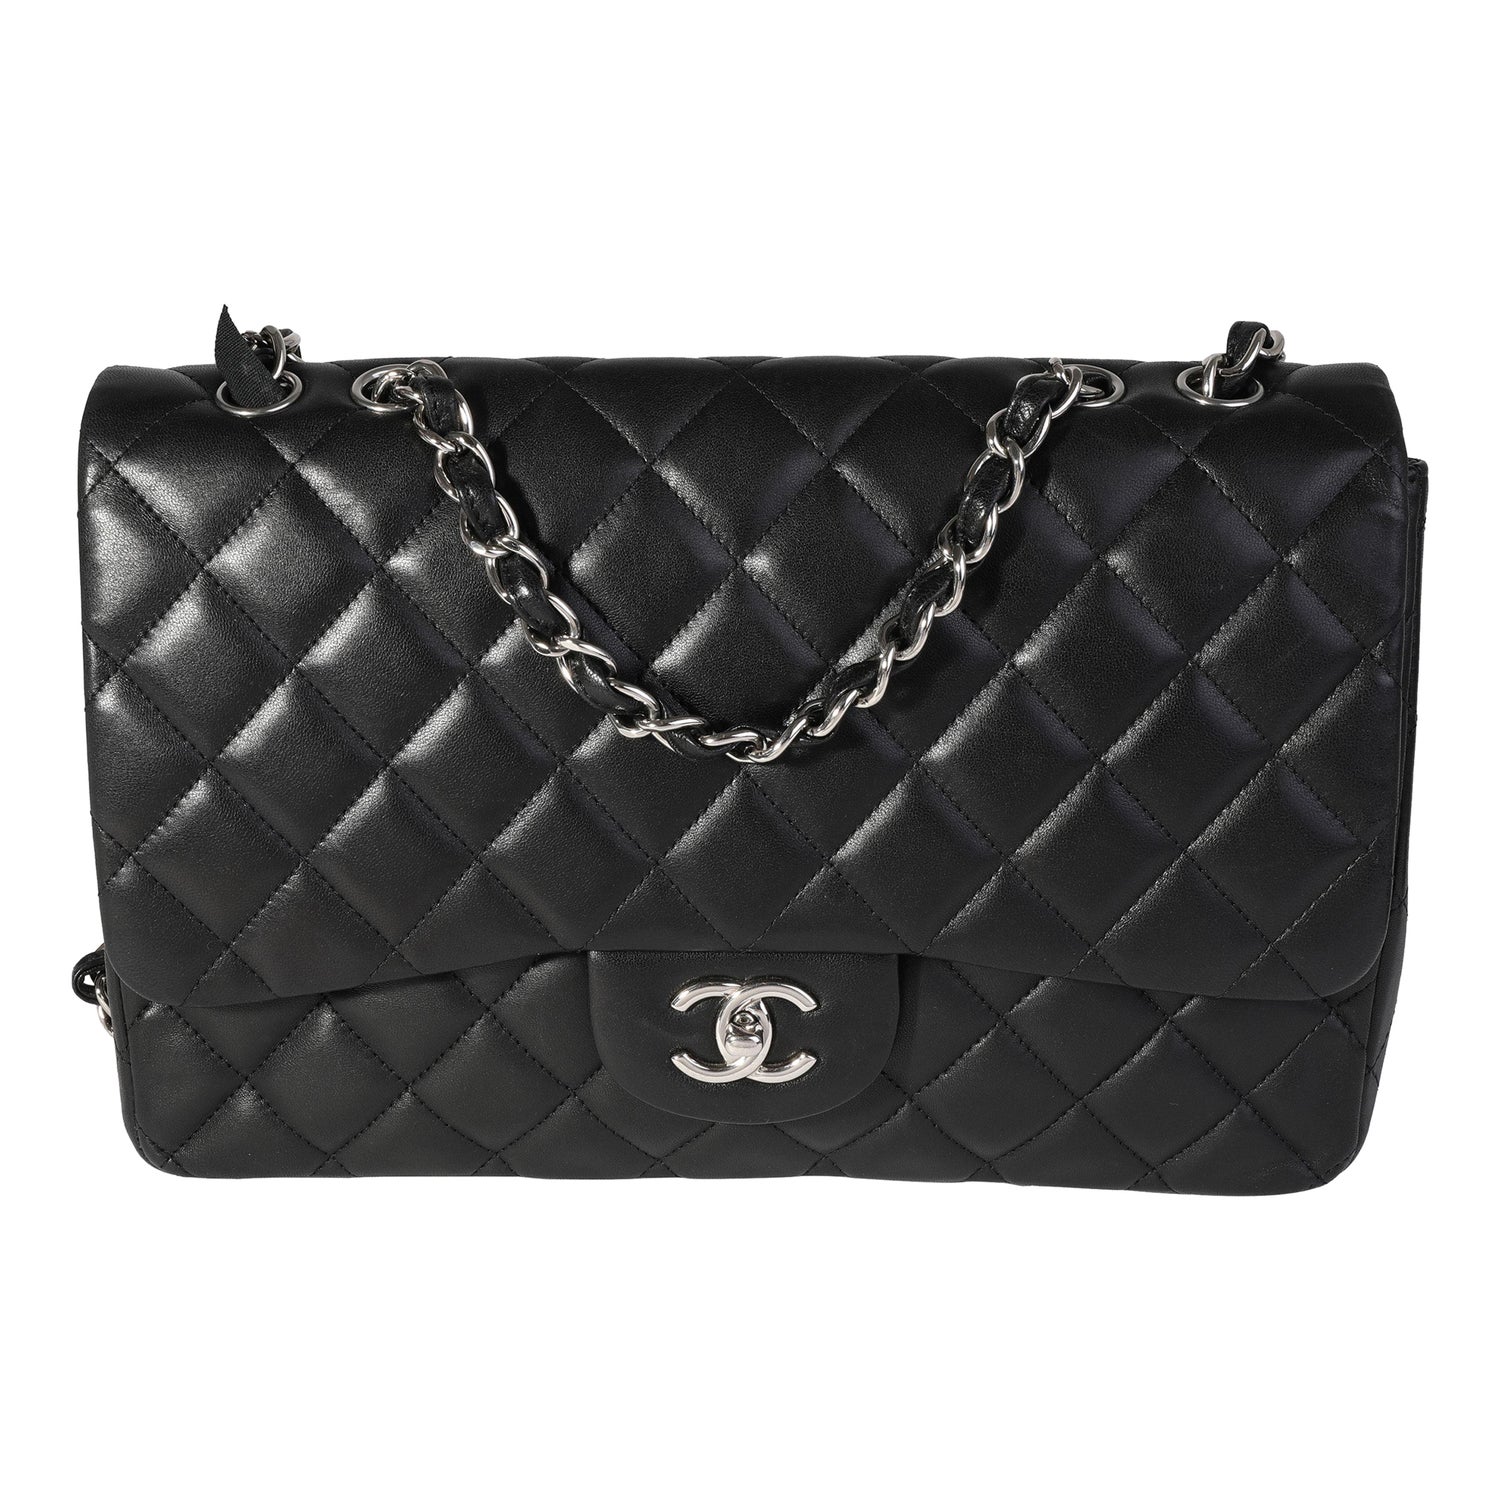 Chanel Black Lambskin Leather Quilted Rectangular Mini Flap